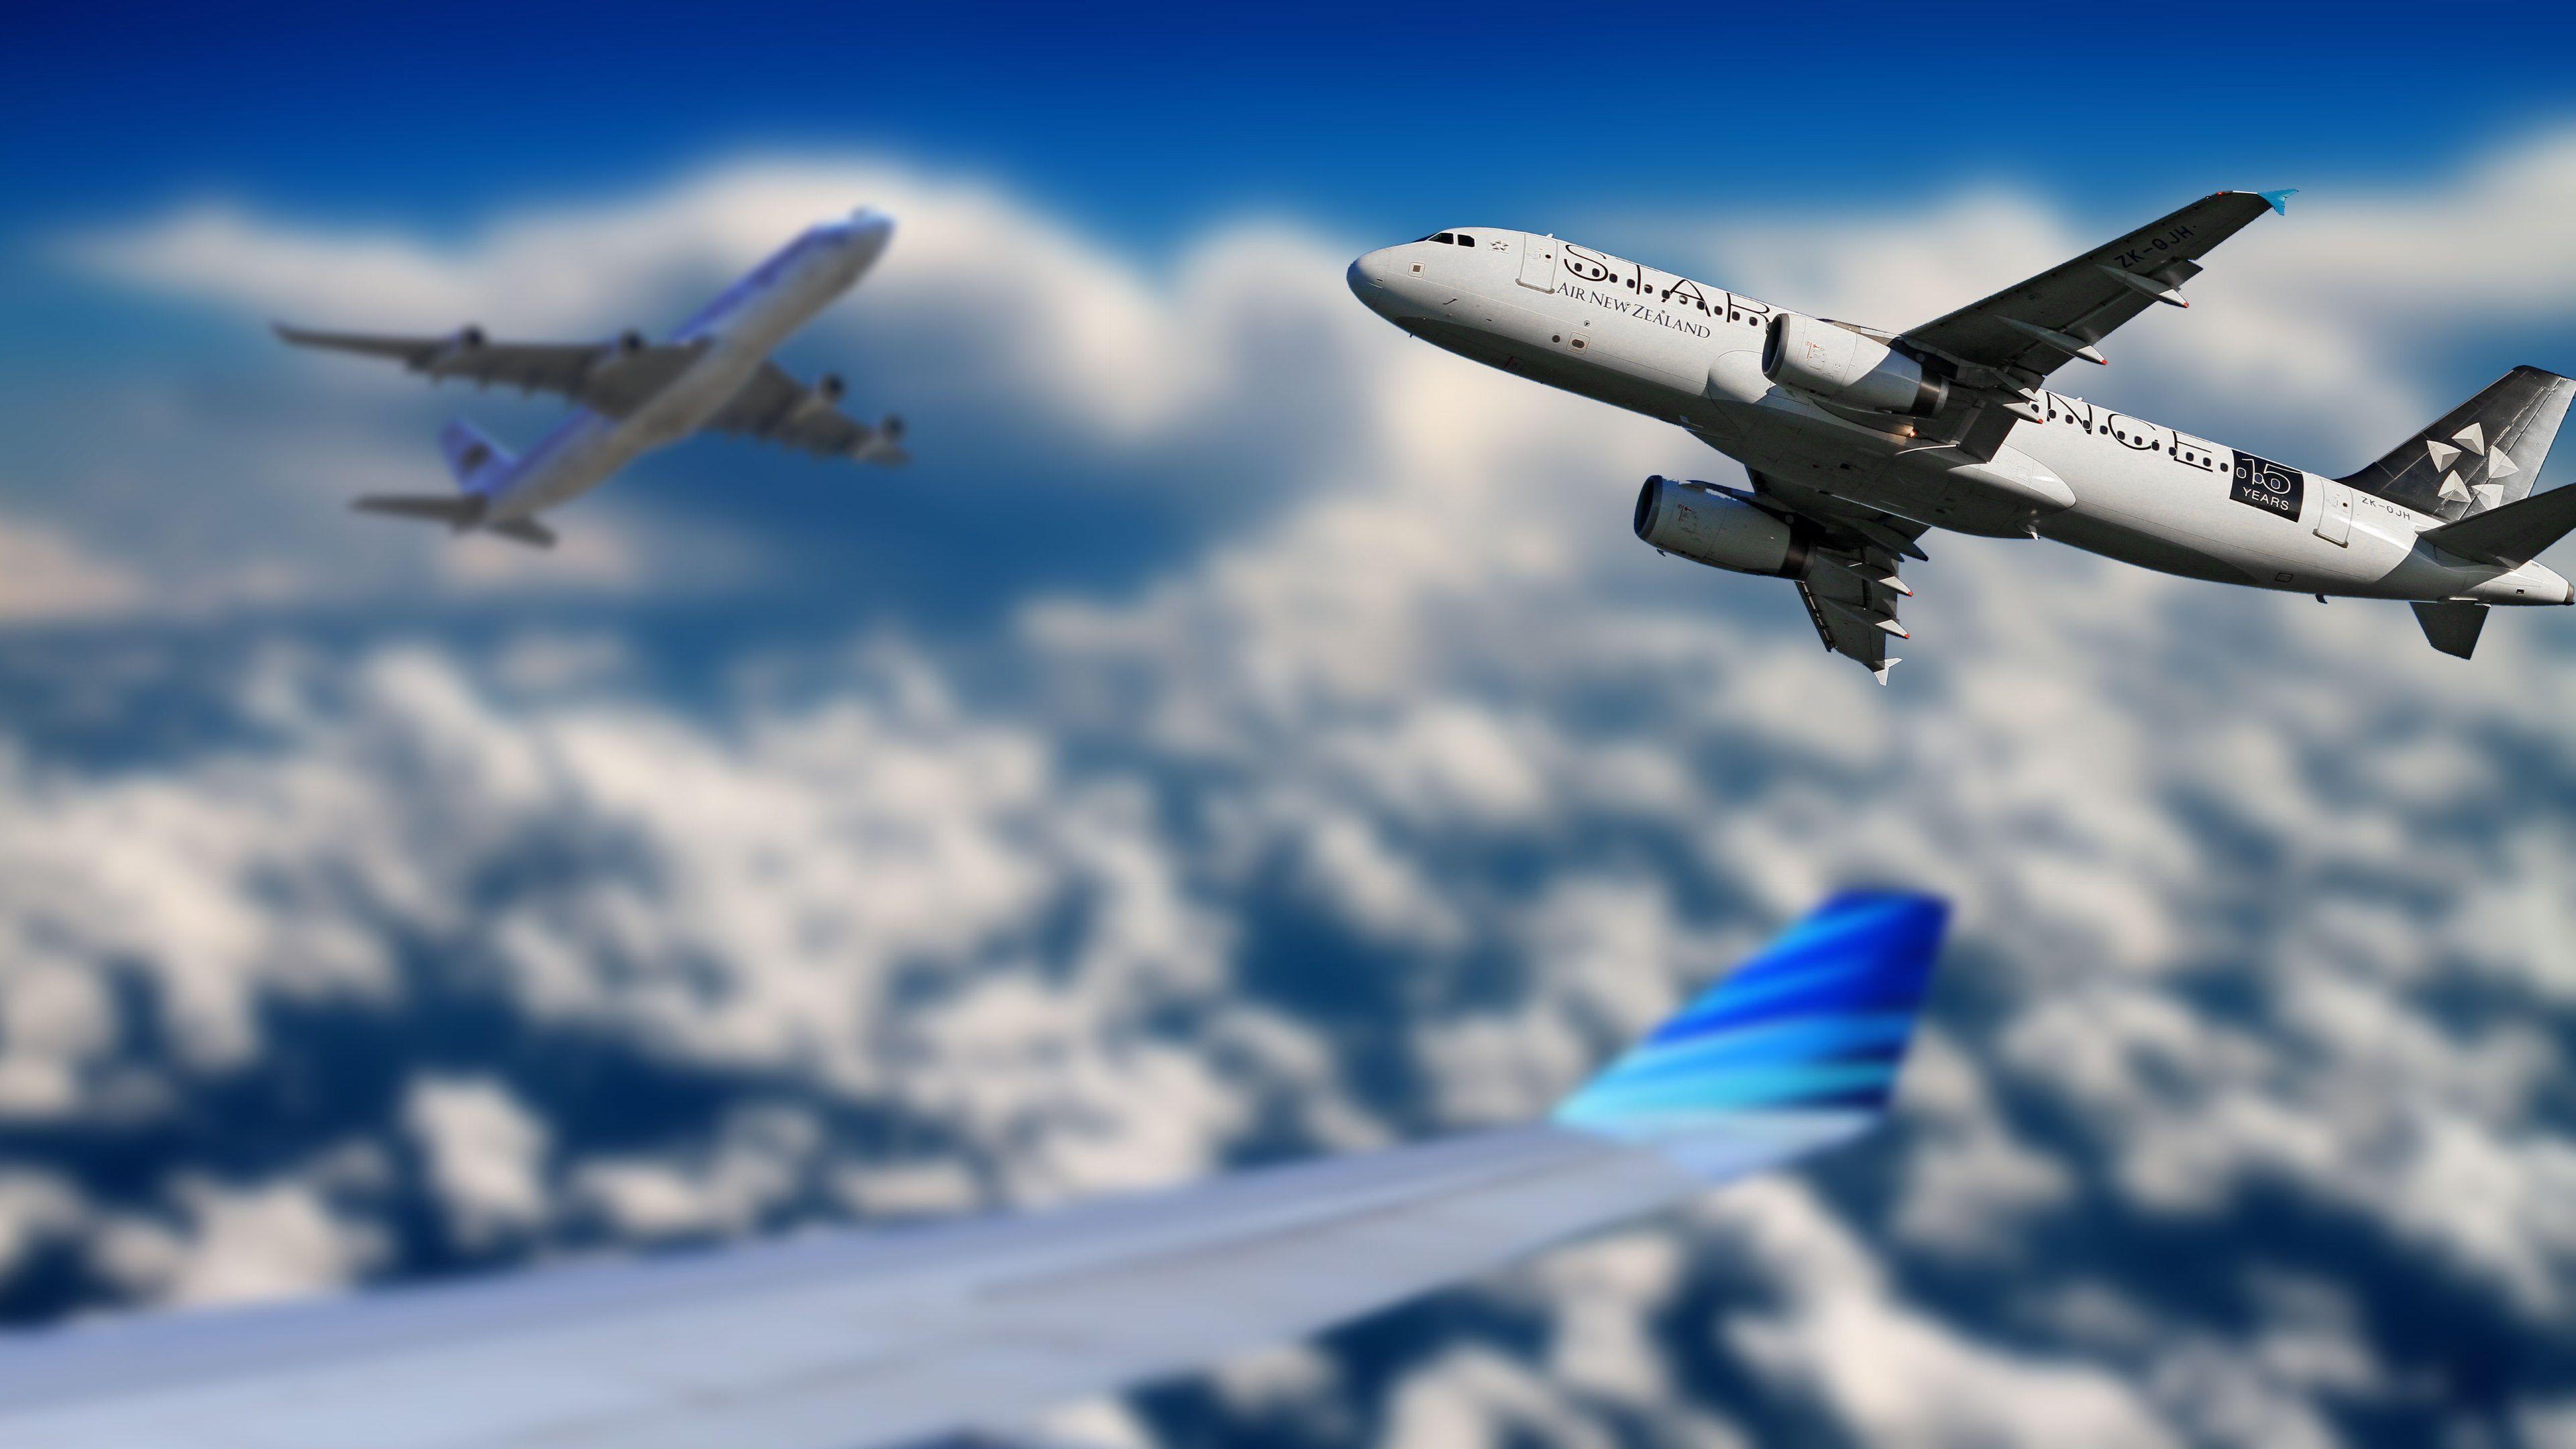 Airline Passenger Aircraft Wallpaper in HD, 4K and wide sizes